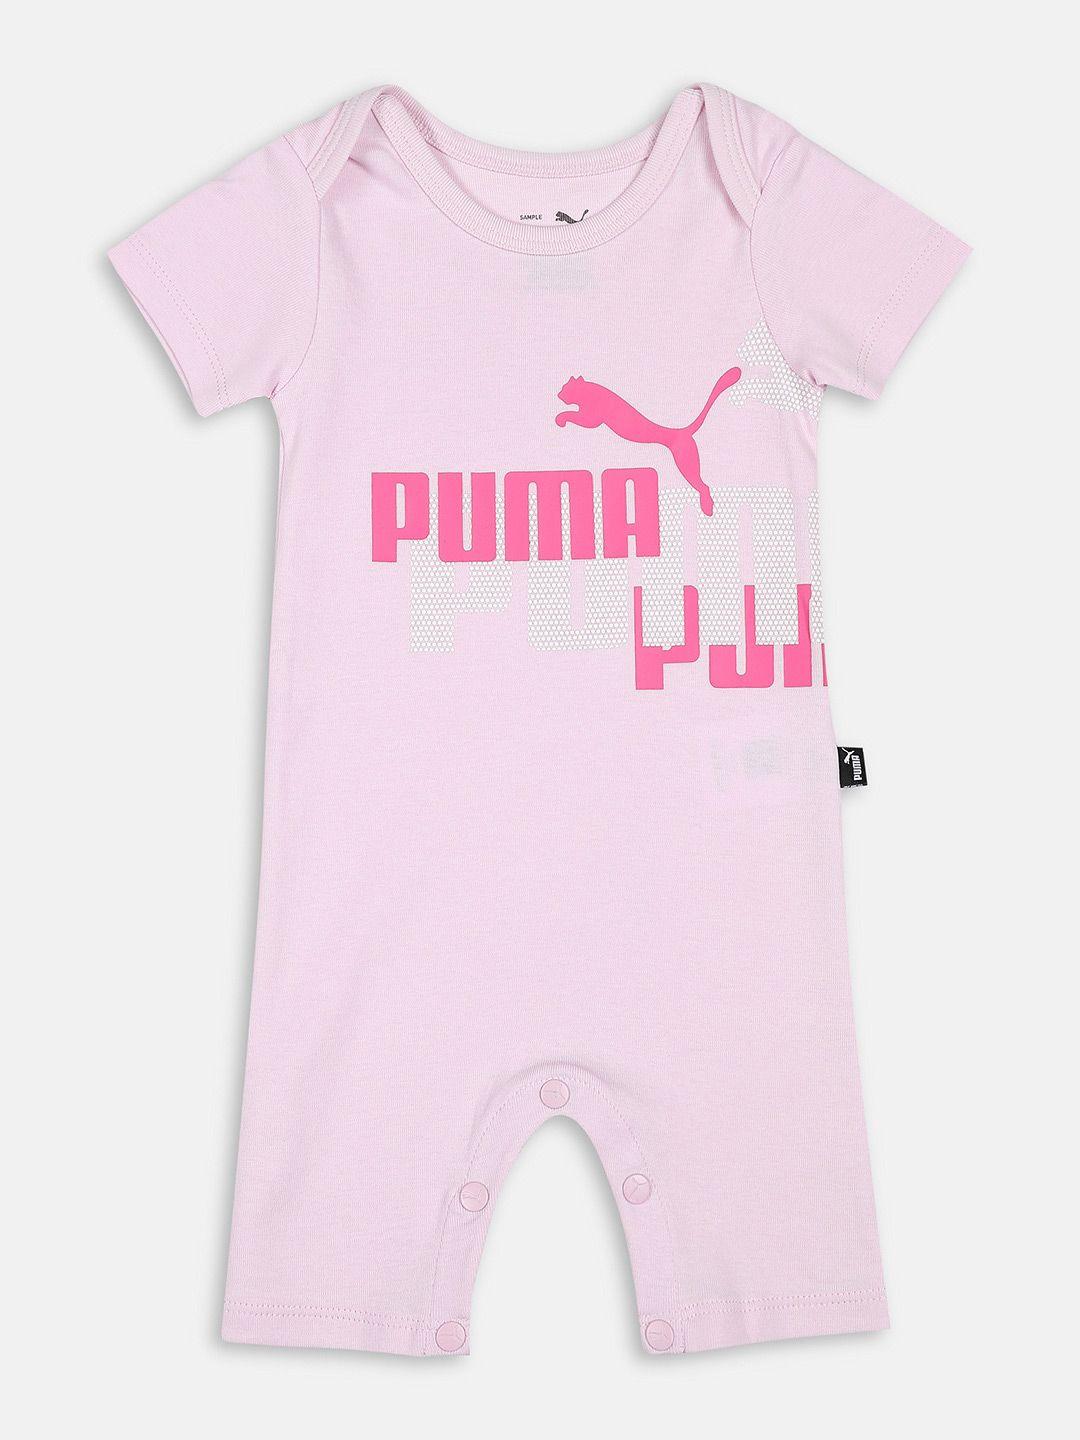 puma-kids-brand-logo-print-minicats-newborn-oncie-overall-knitted-pure-cotton-rompers